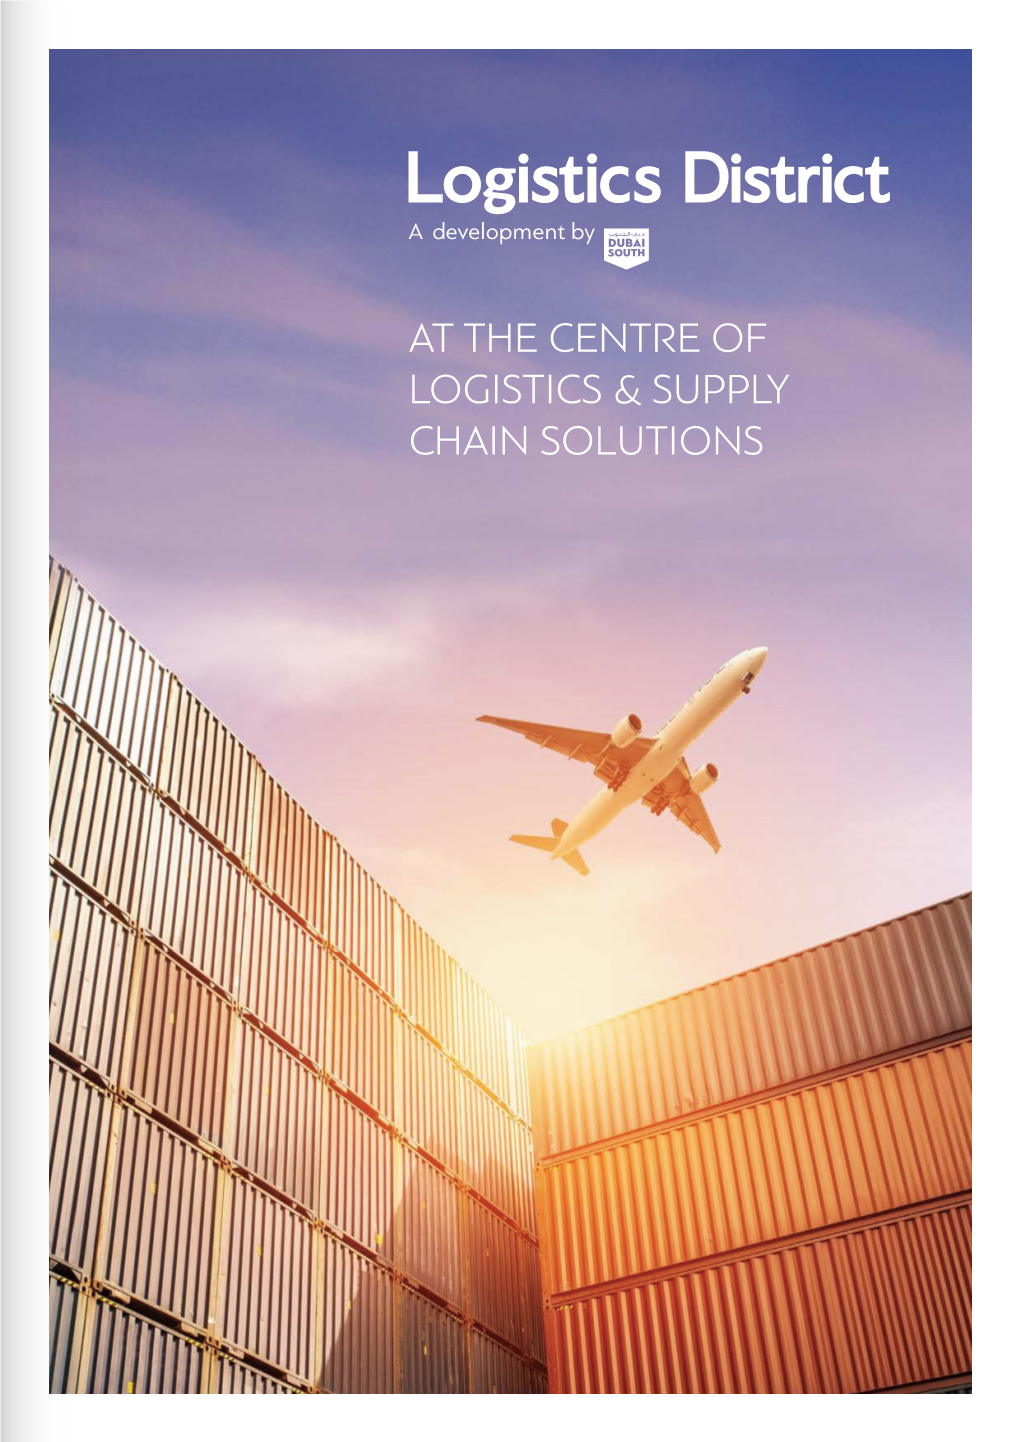 At the Centre of Logistics & Supply Chain Solutions